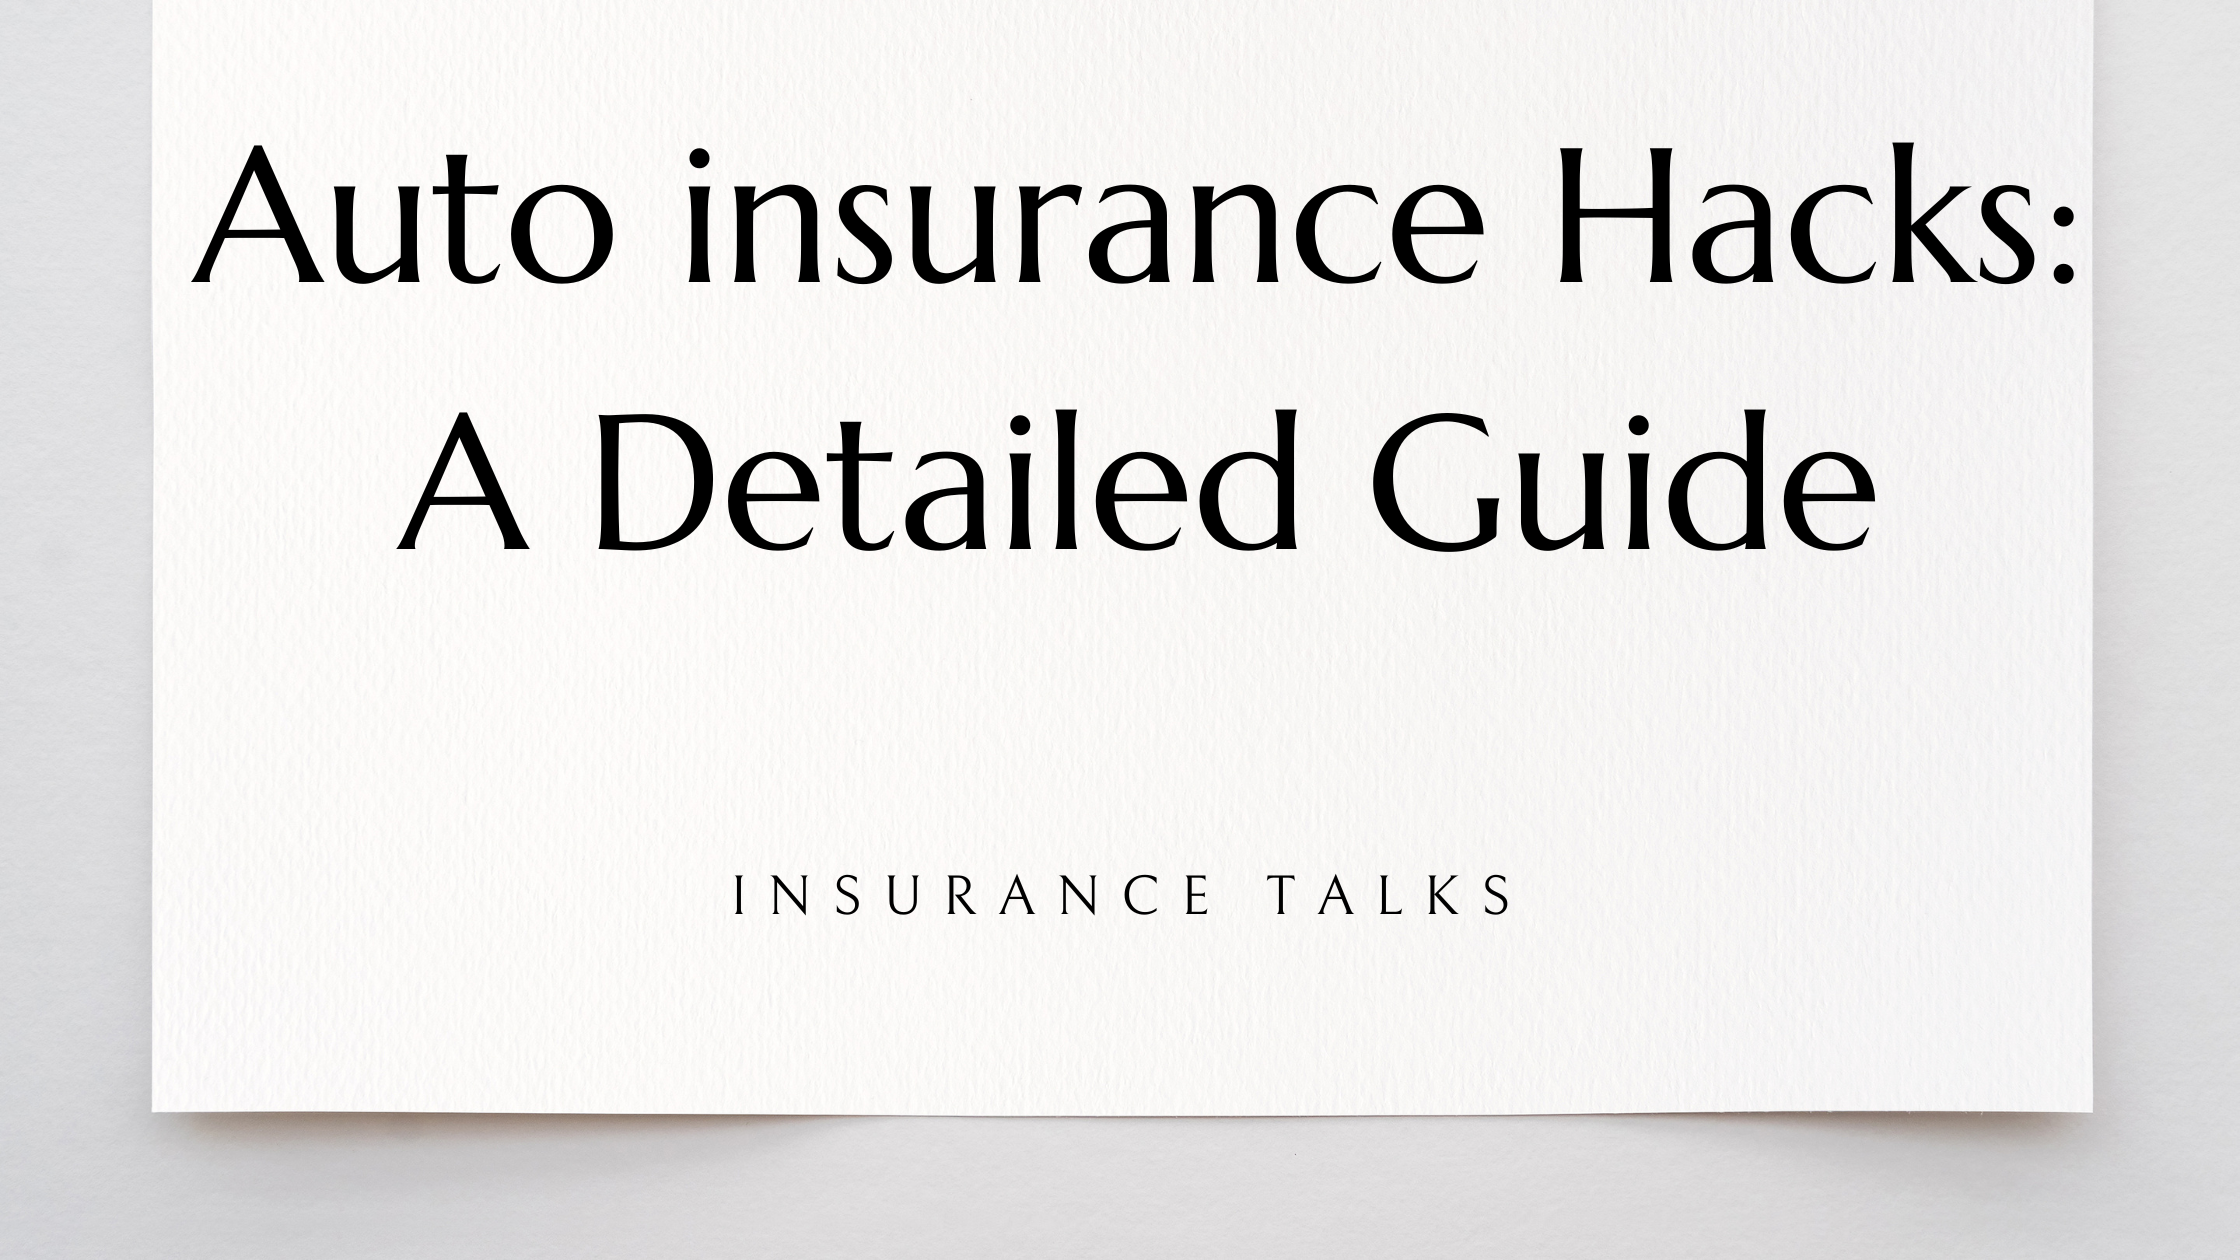 Auto insurance Hacks: A Detailed Guide